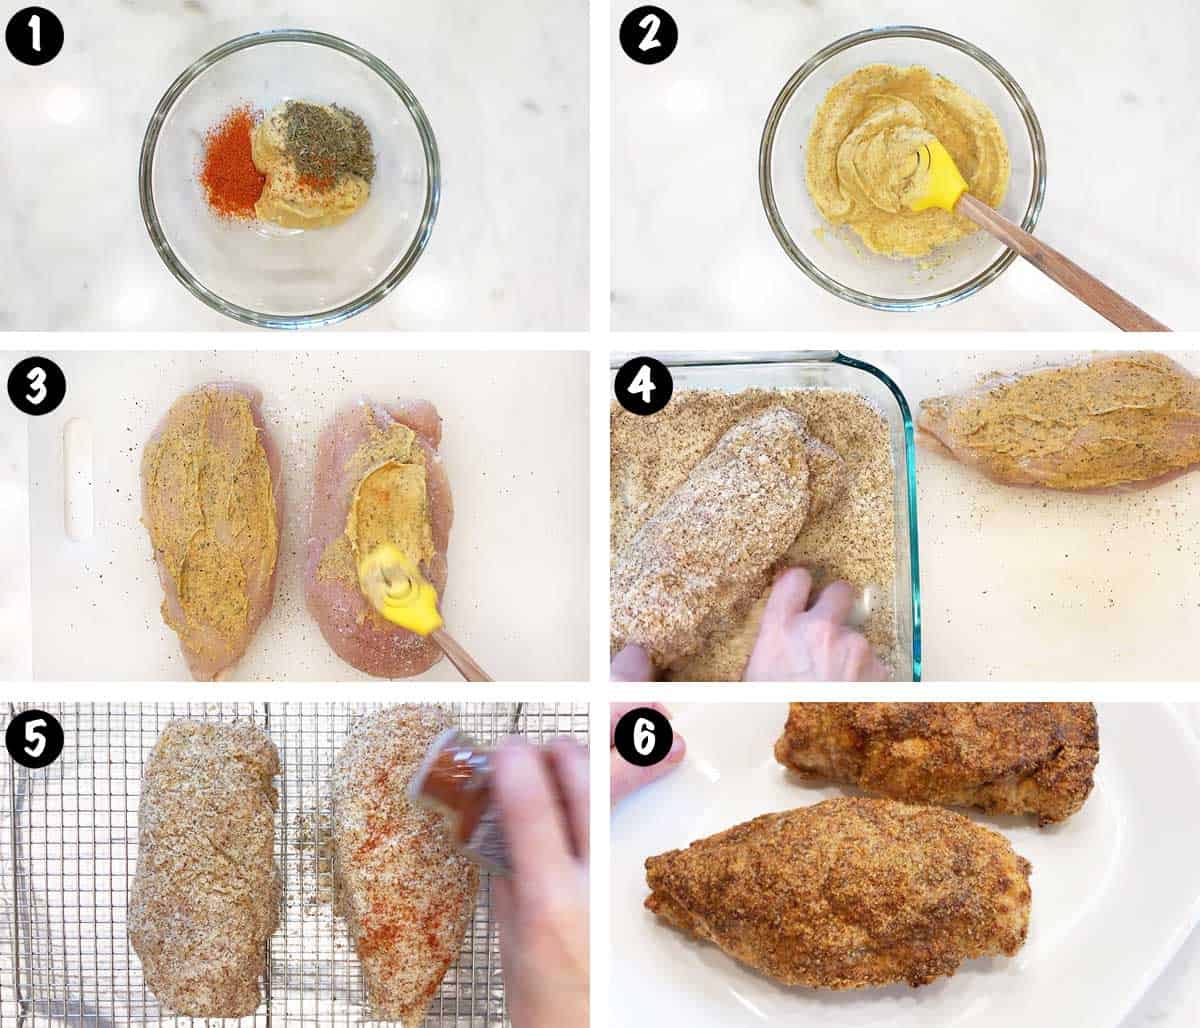 A photo collage showing the steps for making parmesan-crusted chicken. 